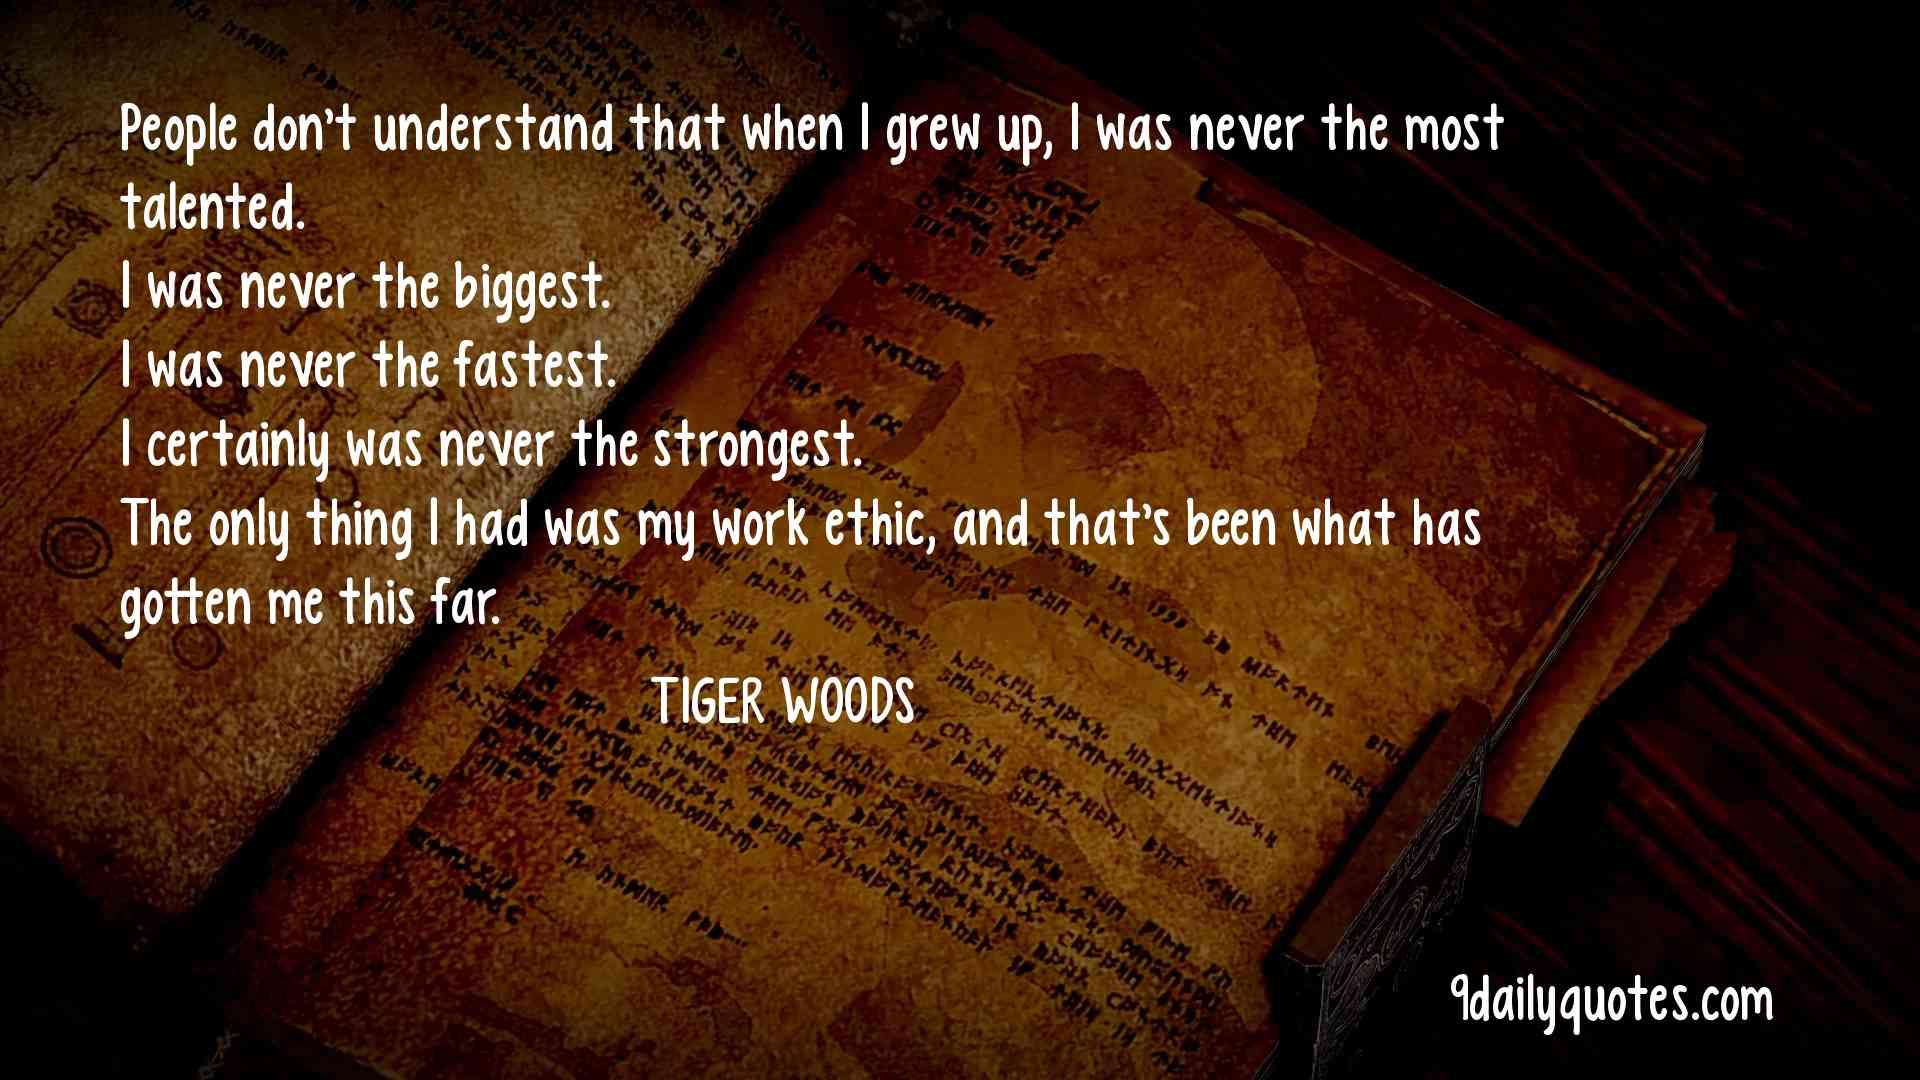 Tiiger Woods work ethic quotes